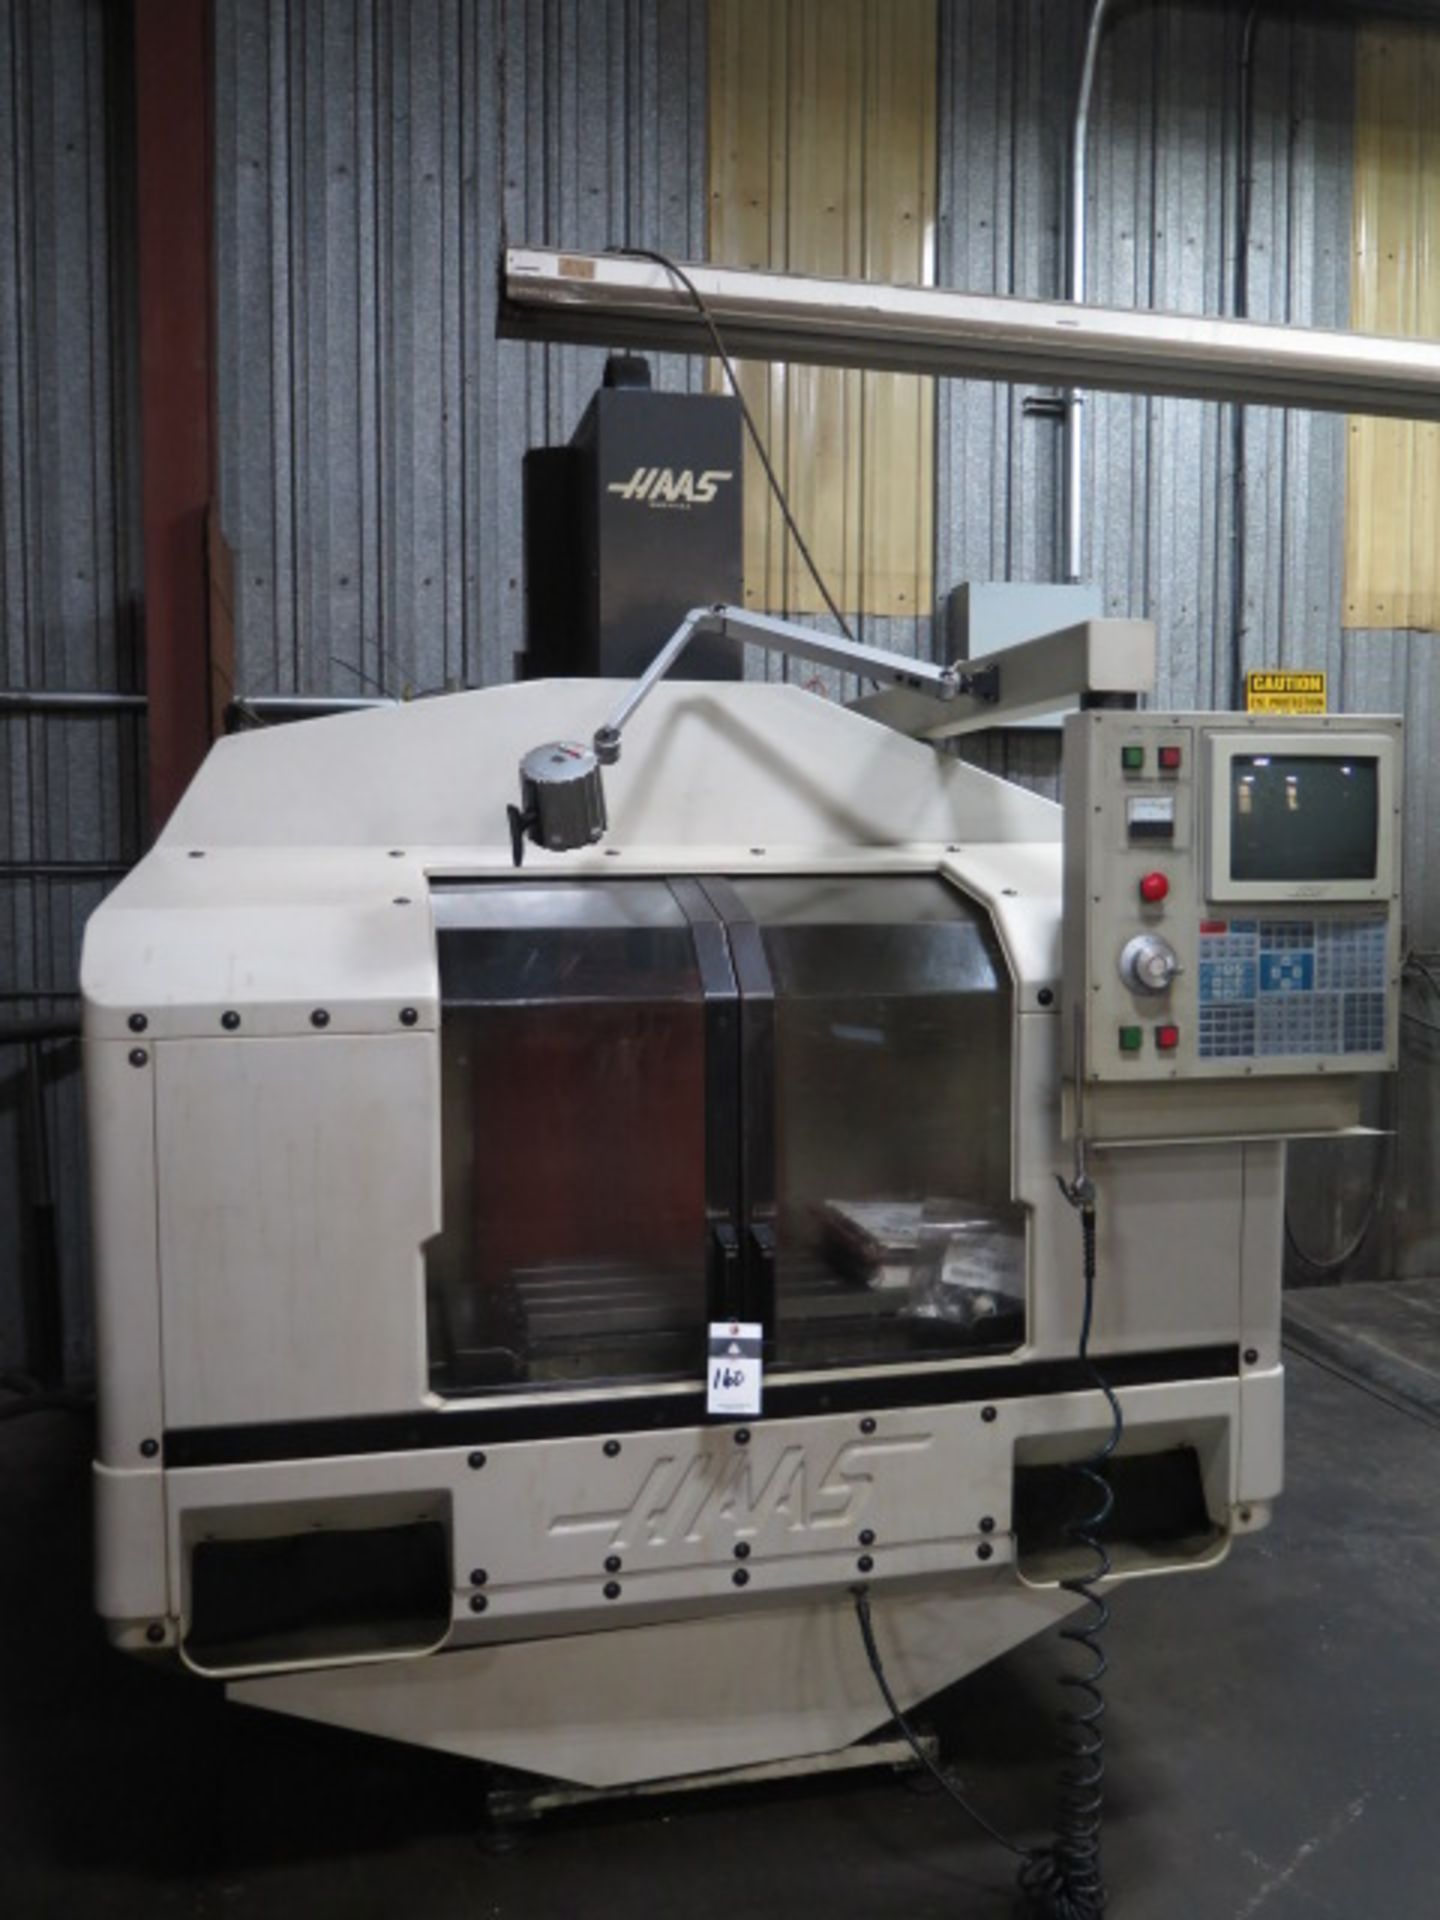 1992 Haas VF-0 4-Axis CNC Vertical Machining Center s/n Haas Controls, 20-Station ATC, CAT-40 - Image 2 of 14